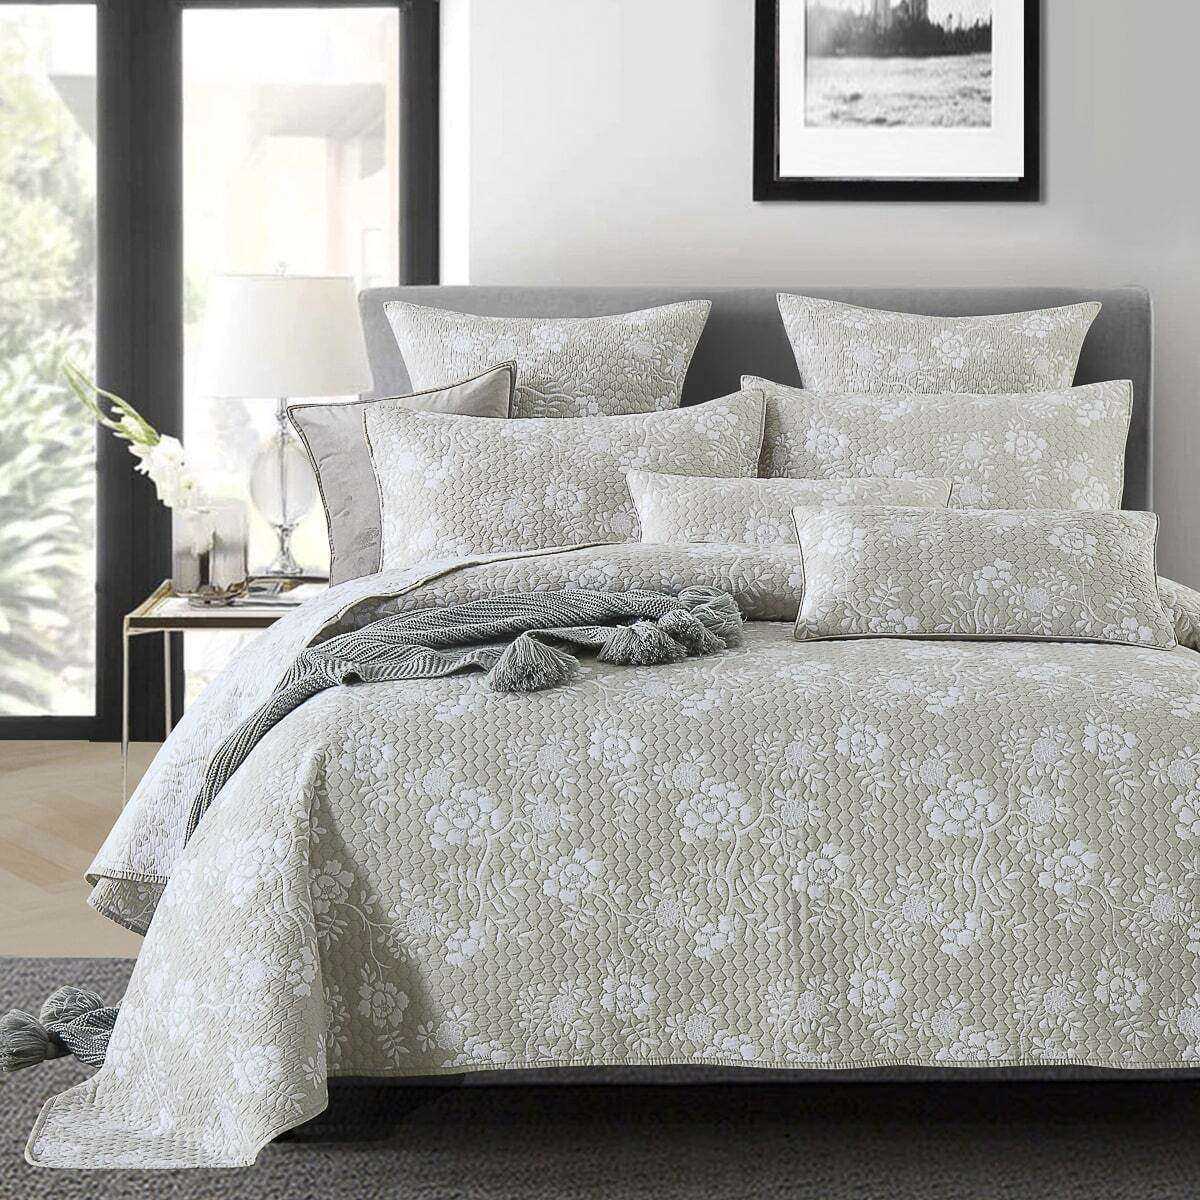 Bedspreads - Coverlet Bedding | On Sale Now